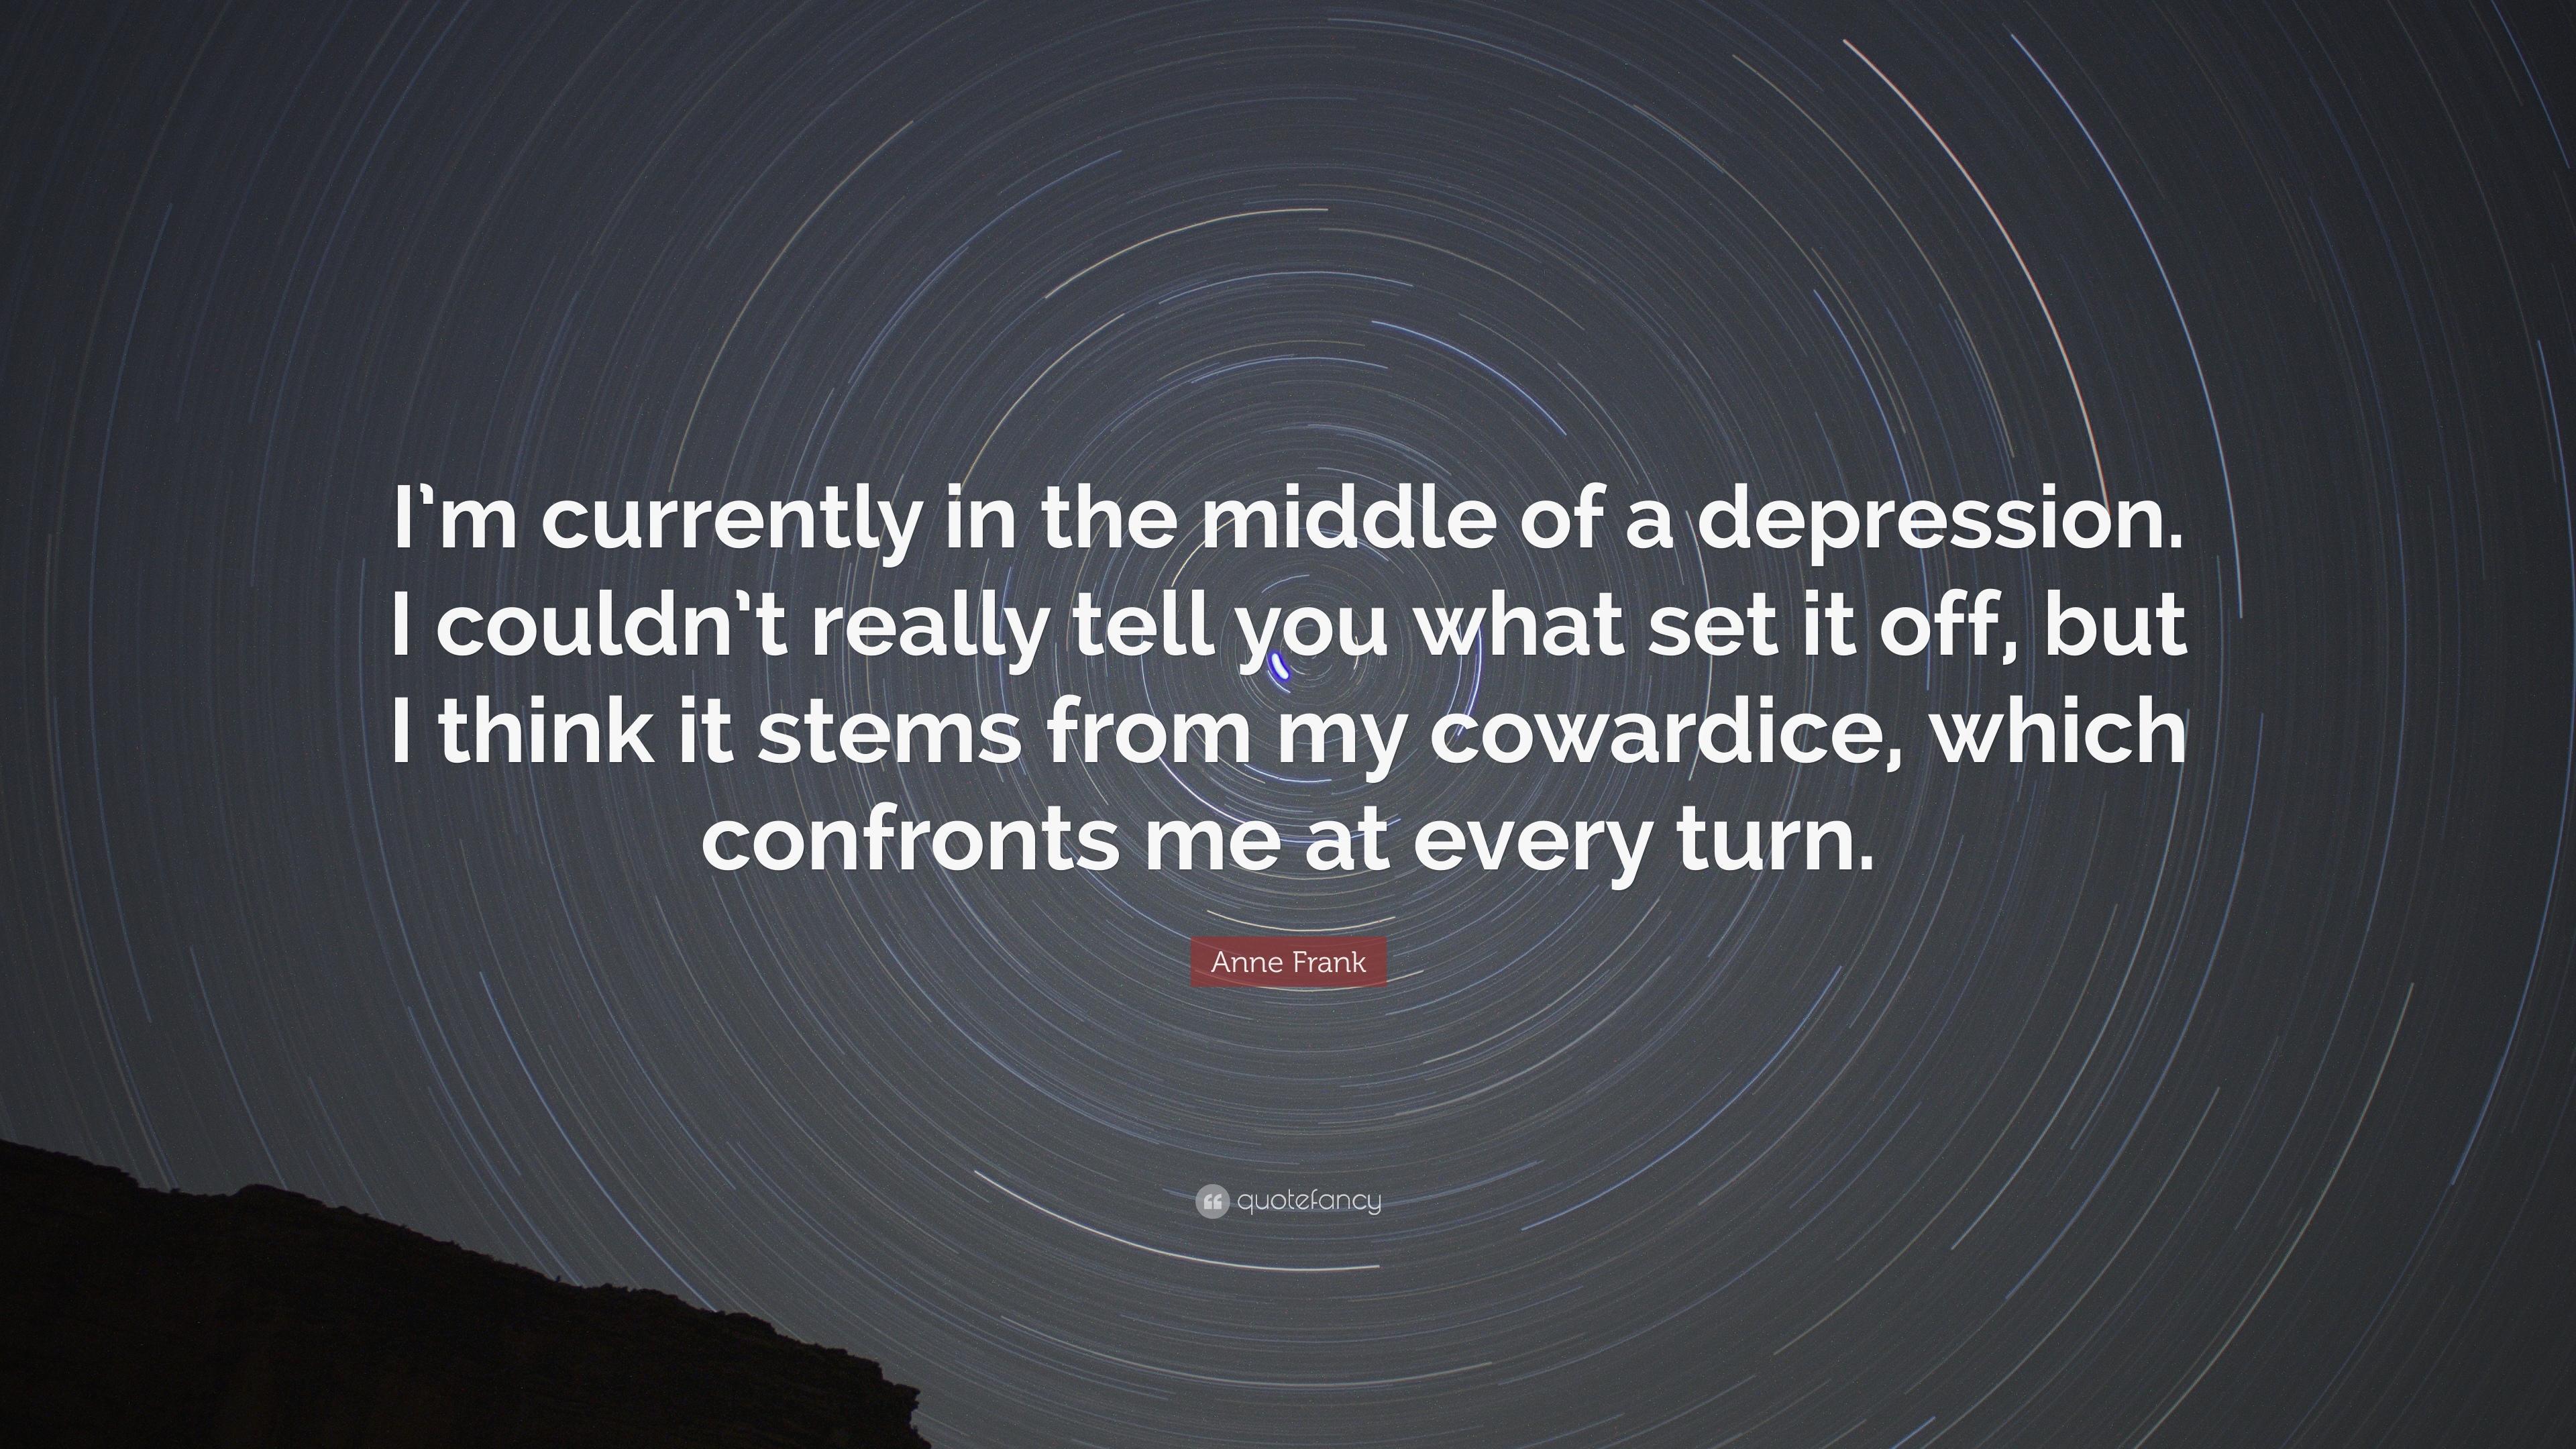 Anne Frank Quote: “I'm currently in the middle of a depression. I